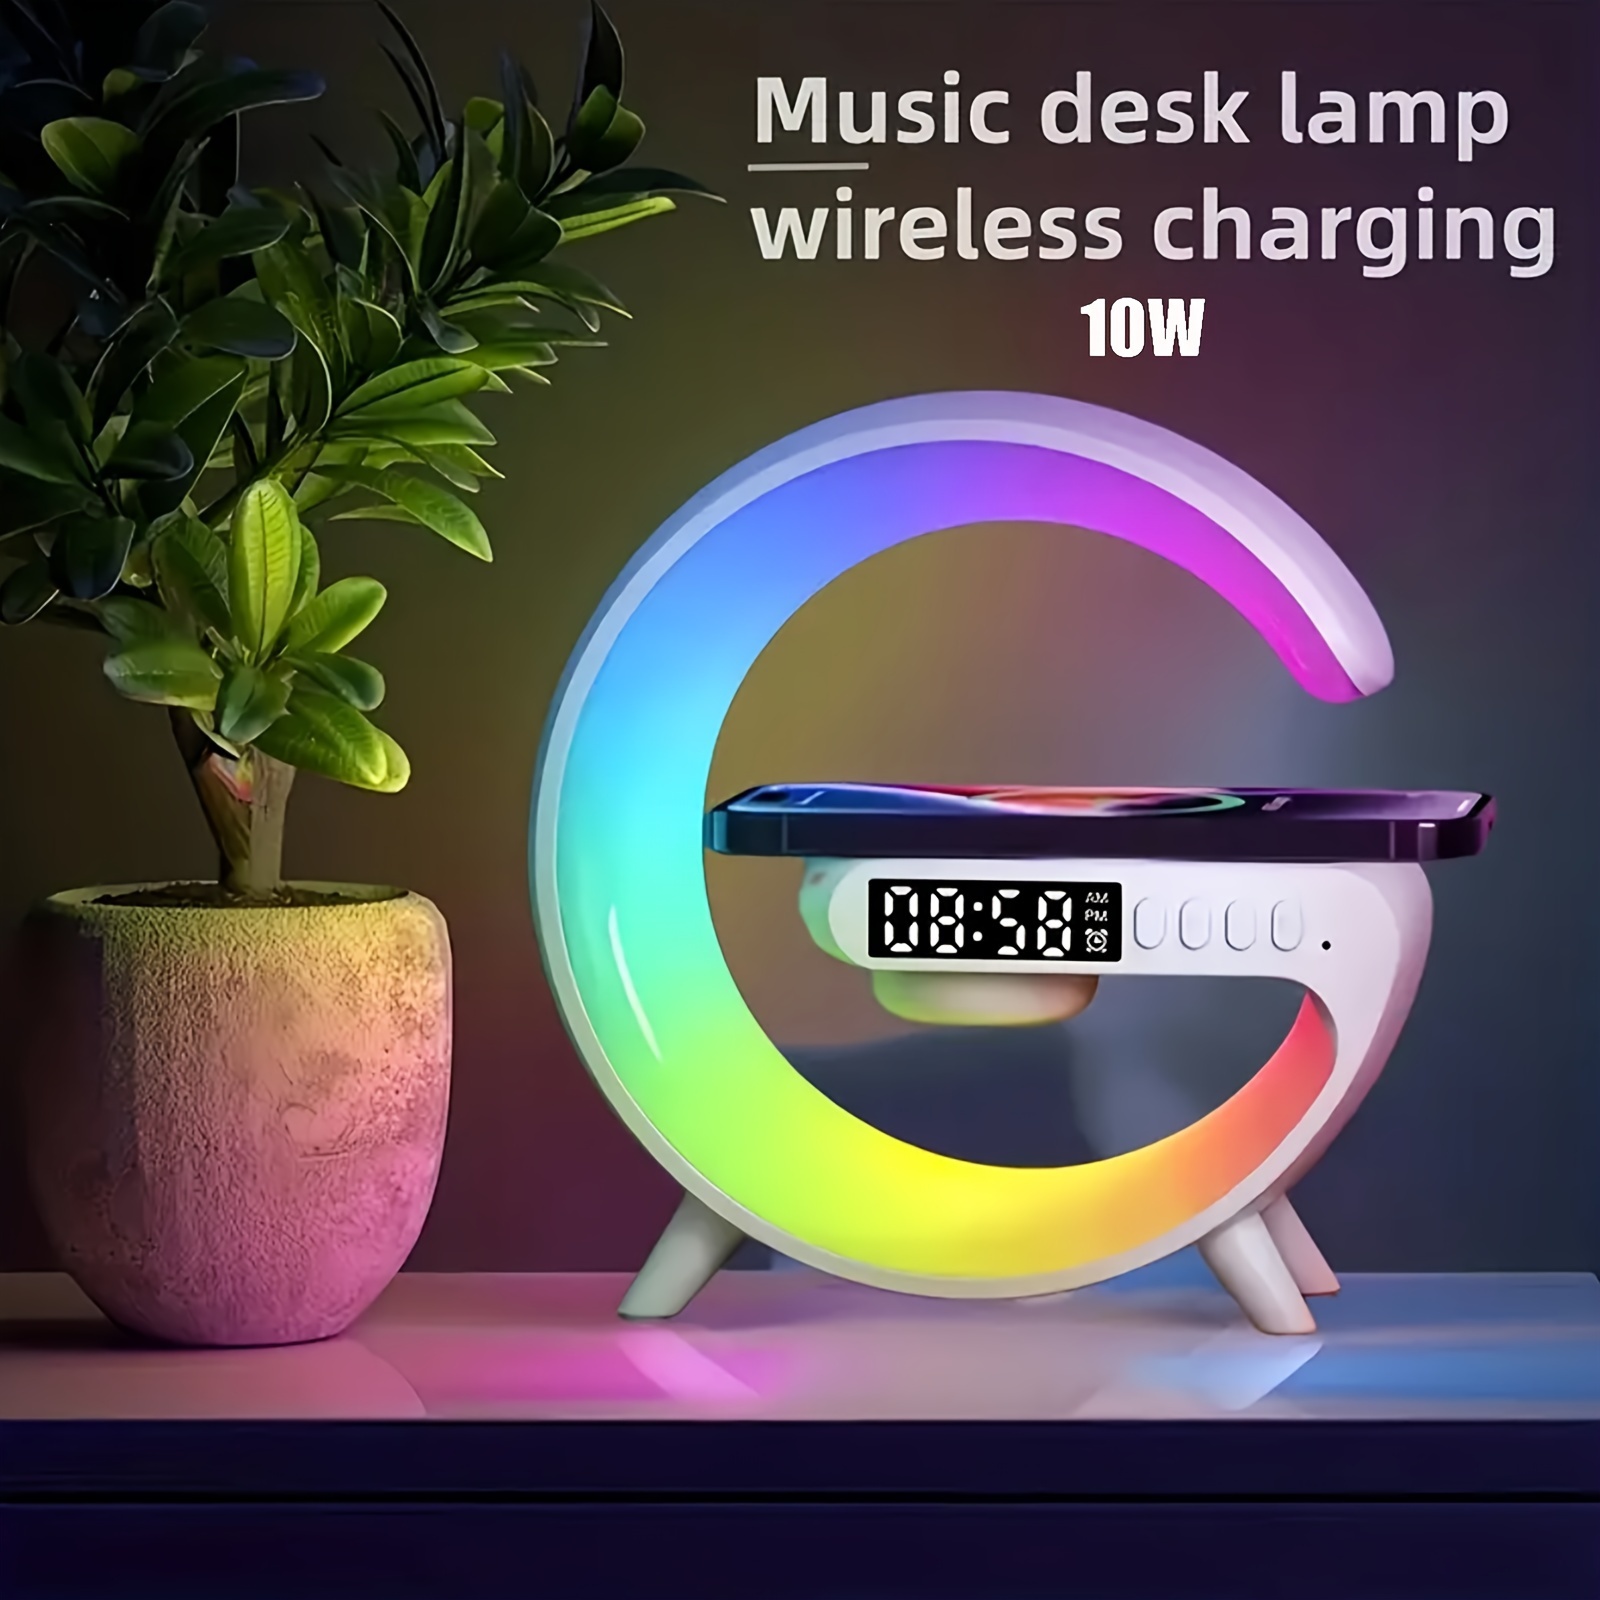 

Wireless Bt Speakers With Wireless Fast Charging, Rhythm Rgb Light, Bar Smart Light, Sunrise Alarm Clock, Wake Up Light For Bedrooms, Dimmable Table Lamp